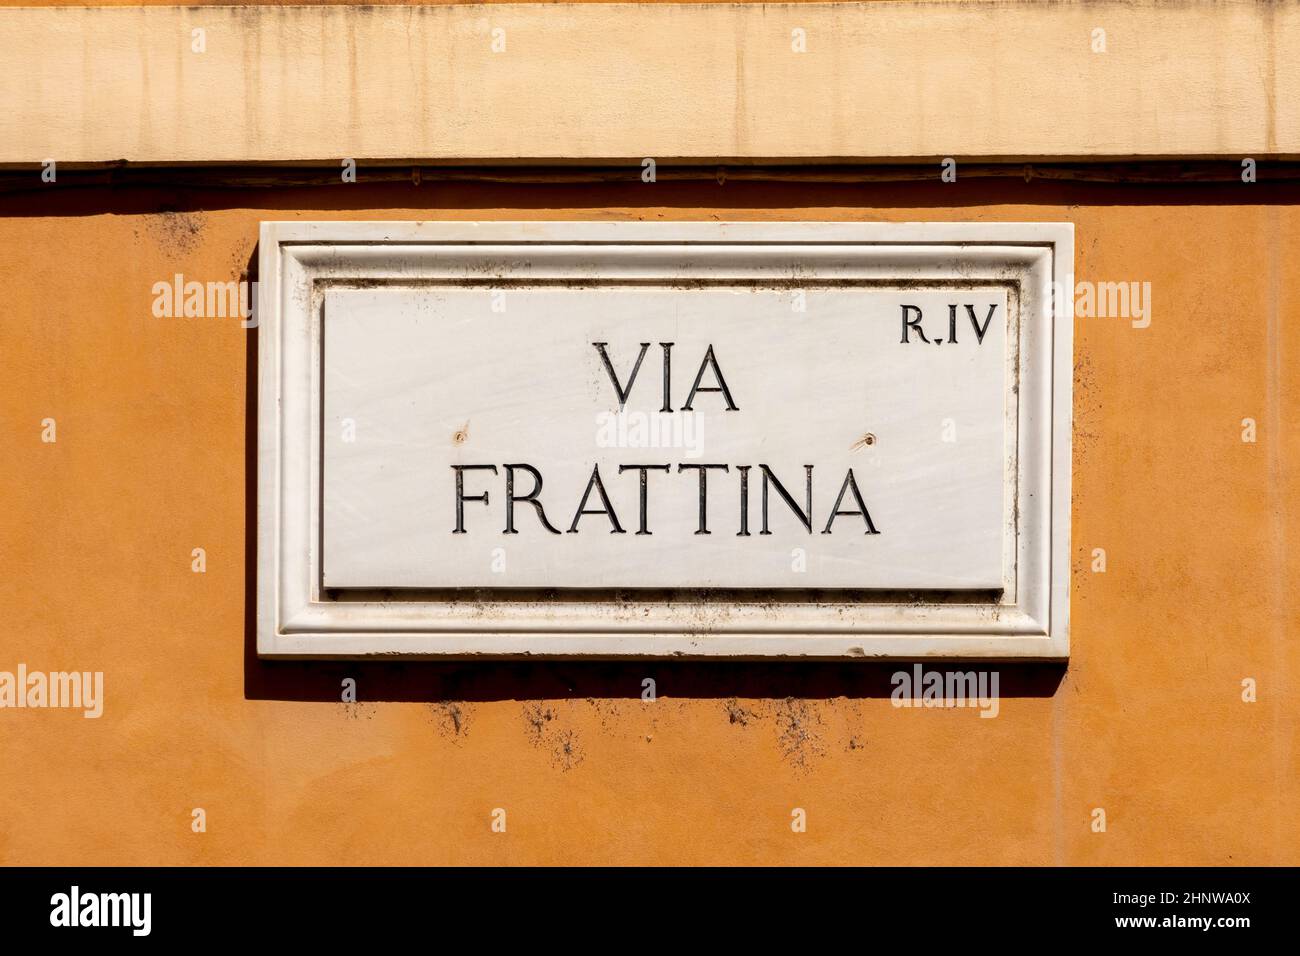 marble plate with Street name via Frattina - engl: Fattina street - painted at the wall in Rome, Italy Stock Photo